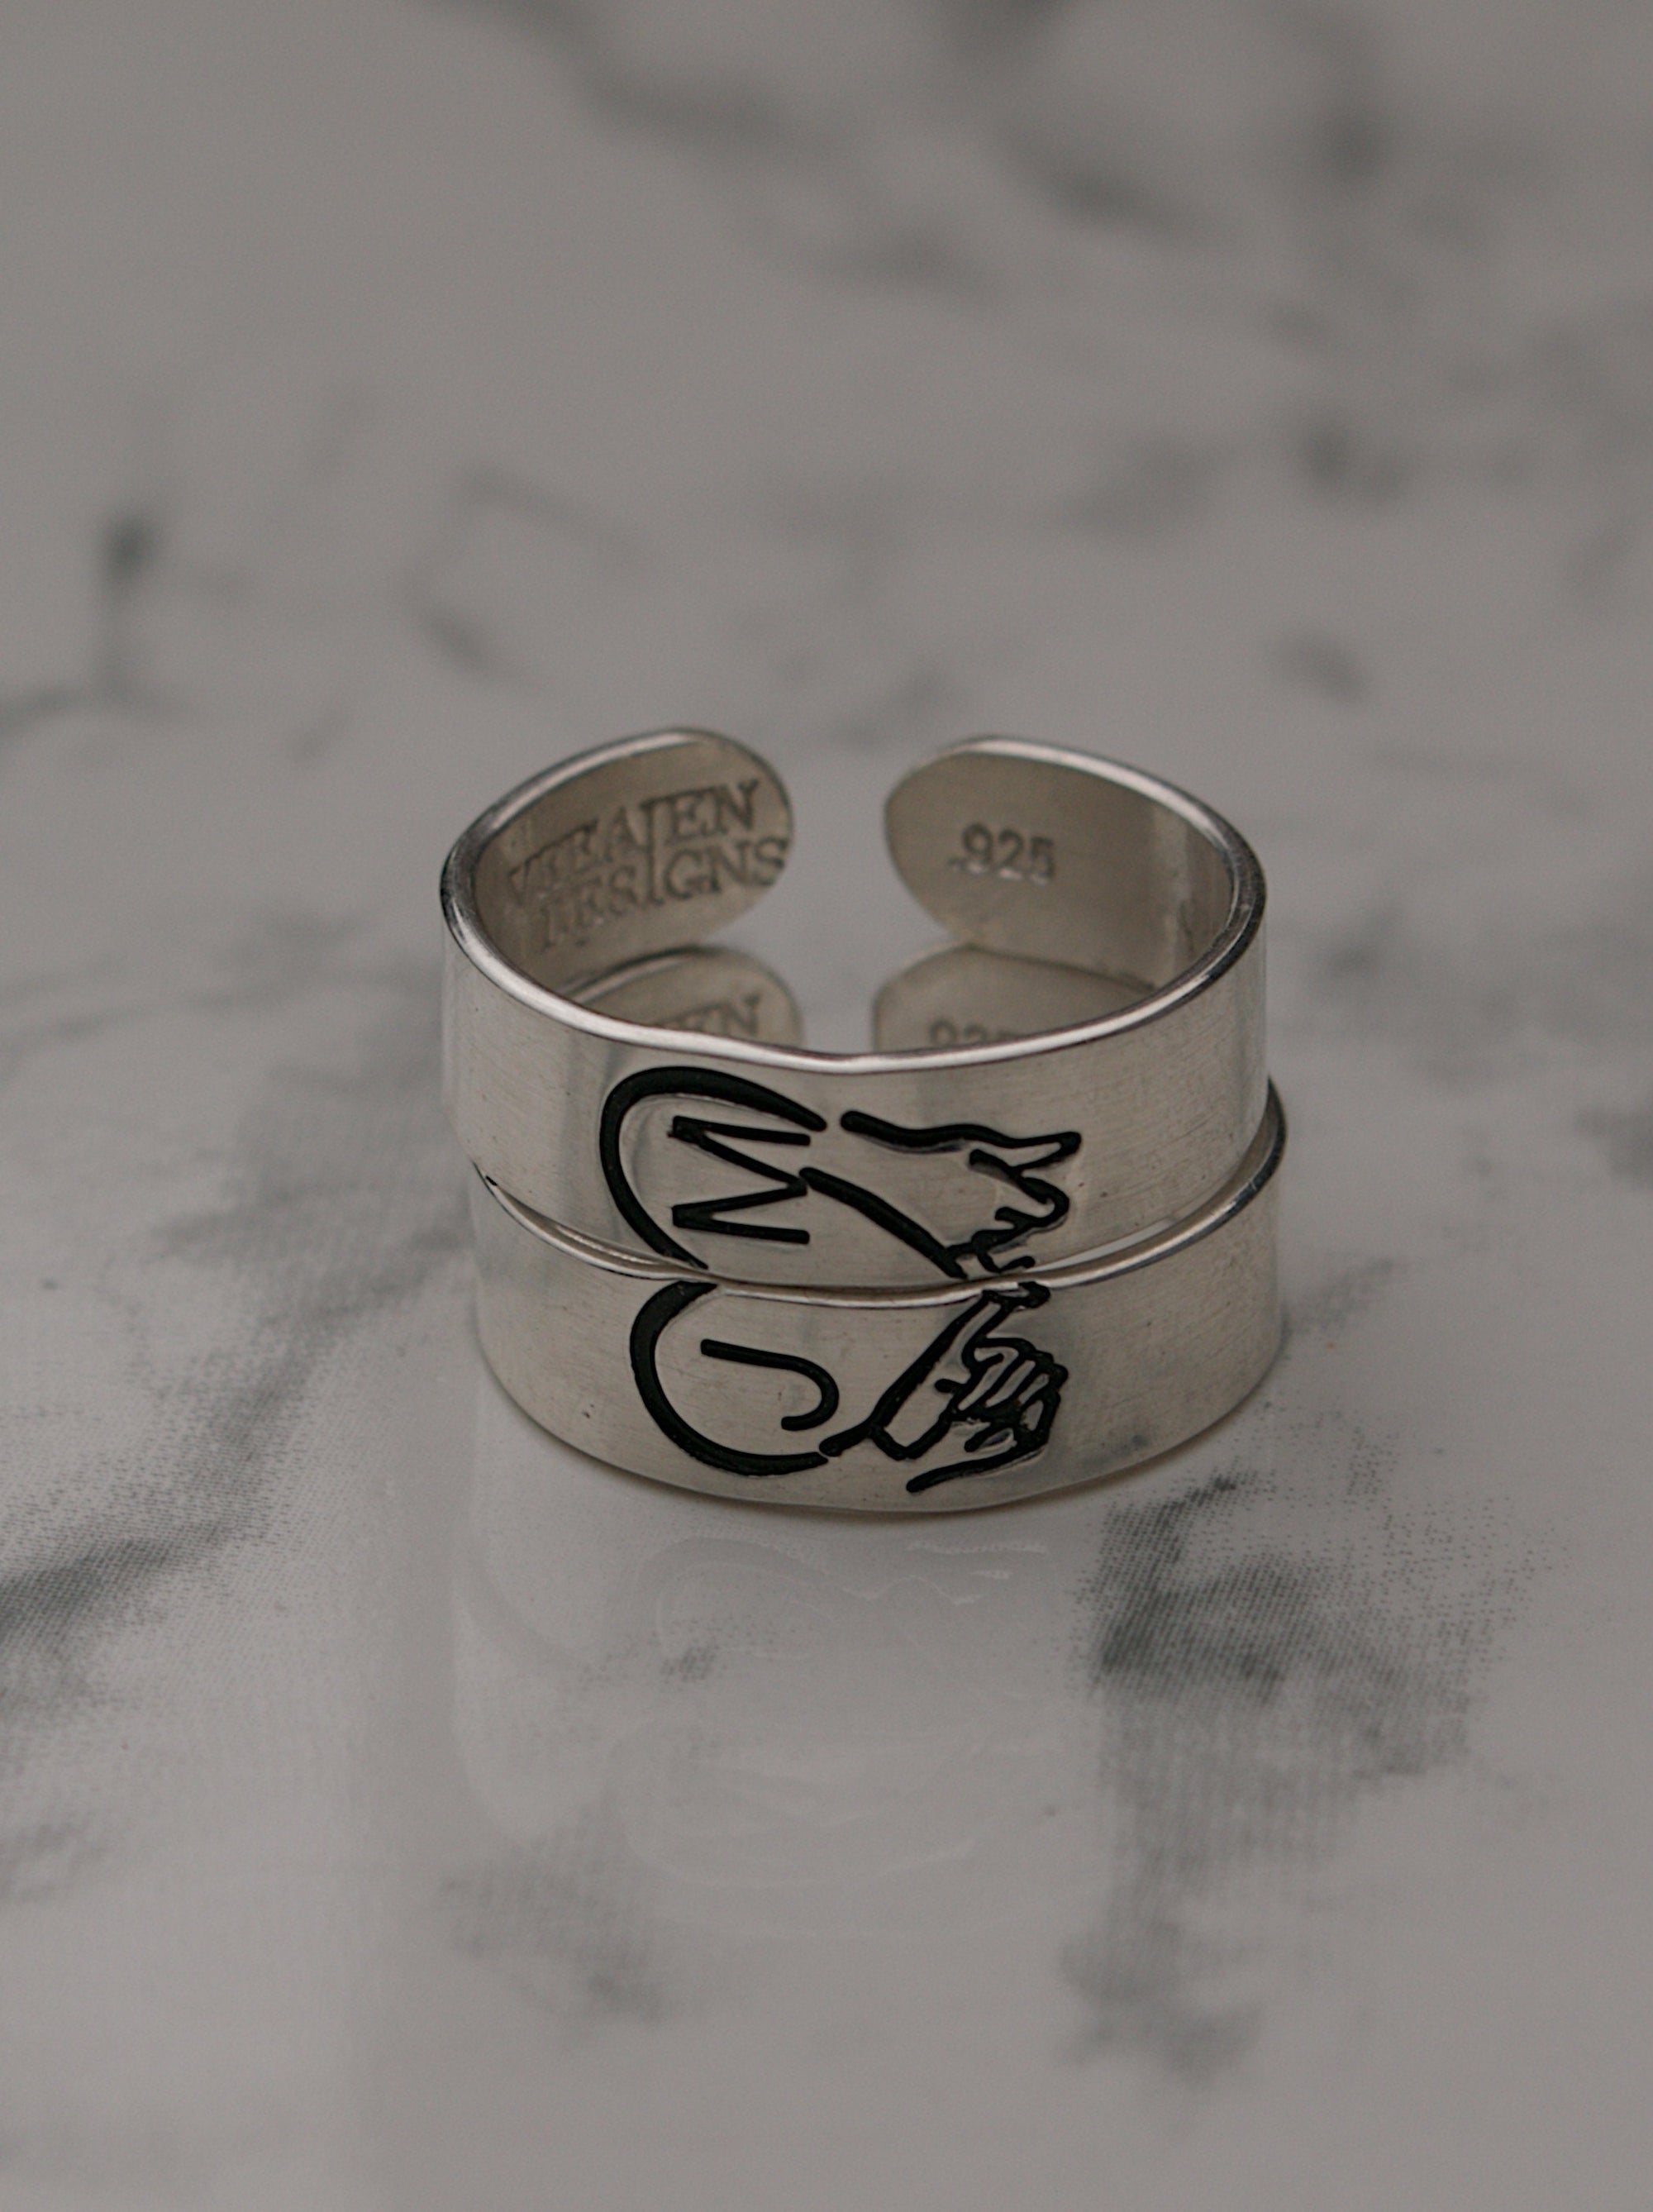 Buy Sterling Silver BEST FRIEND RINGS Personalized Custom Name Engraved Ring  Best Friend Gift Bff Friendship Memorial Jewelry for 2 3 4 5 & More Online  in India - Etsy